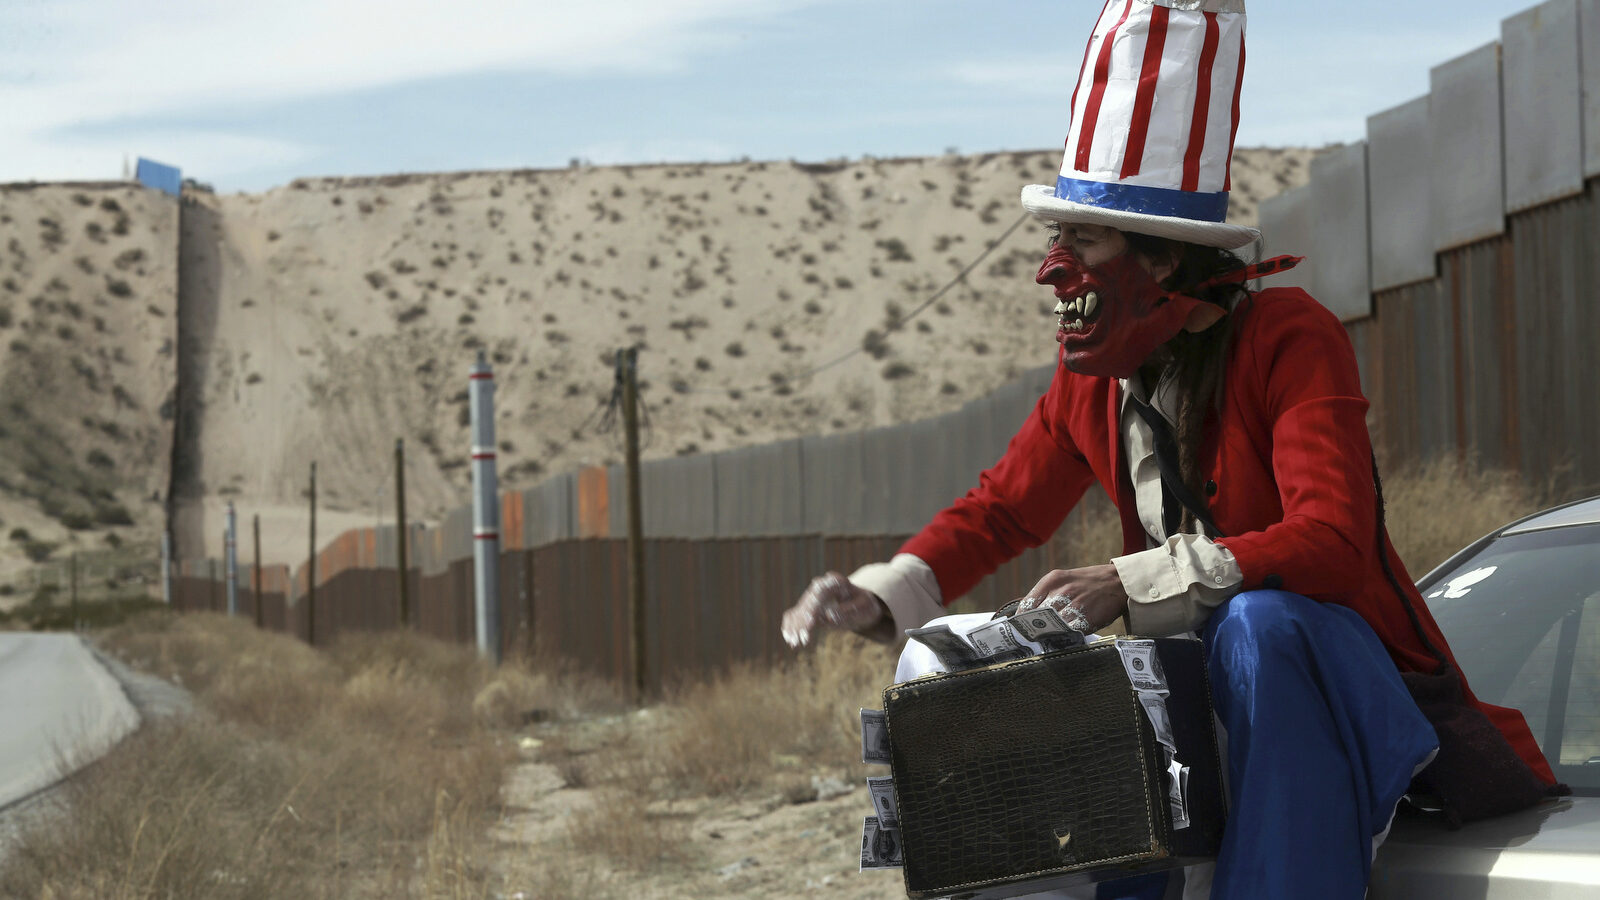 A protester dressed as a diabolical version of Uncle Sam holds a suitcase full of money at the U.S. border fence in Ciudad Juarez, Mexico, Sunday, Feb. 26, 2017. (AP/Christian Torres)